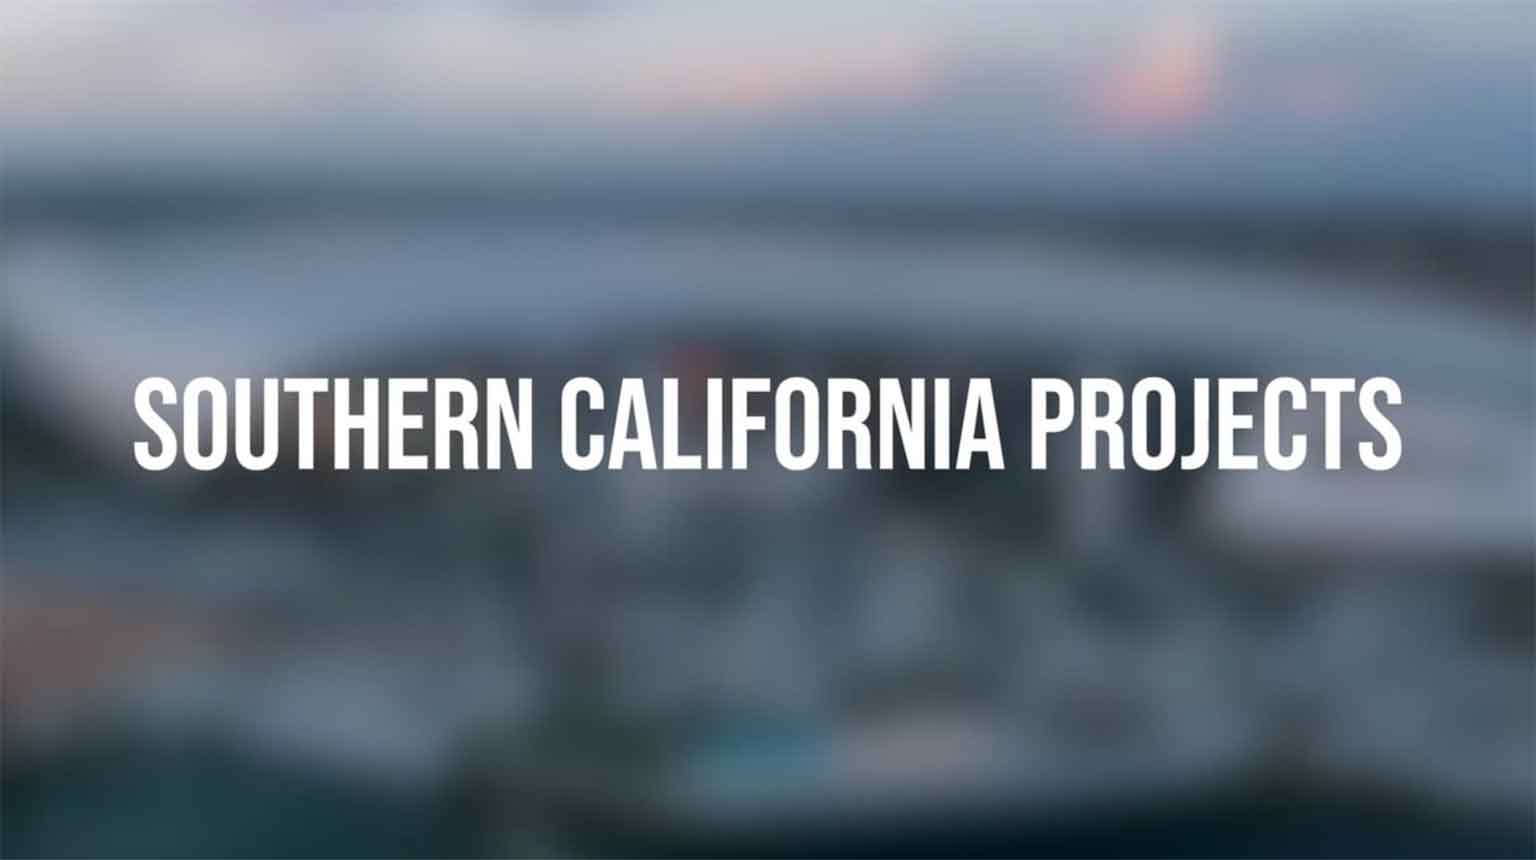 Southern California Projects